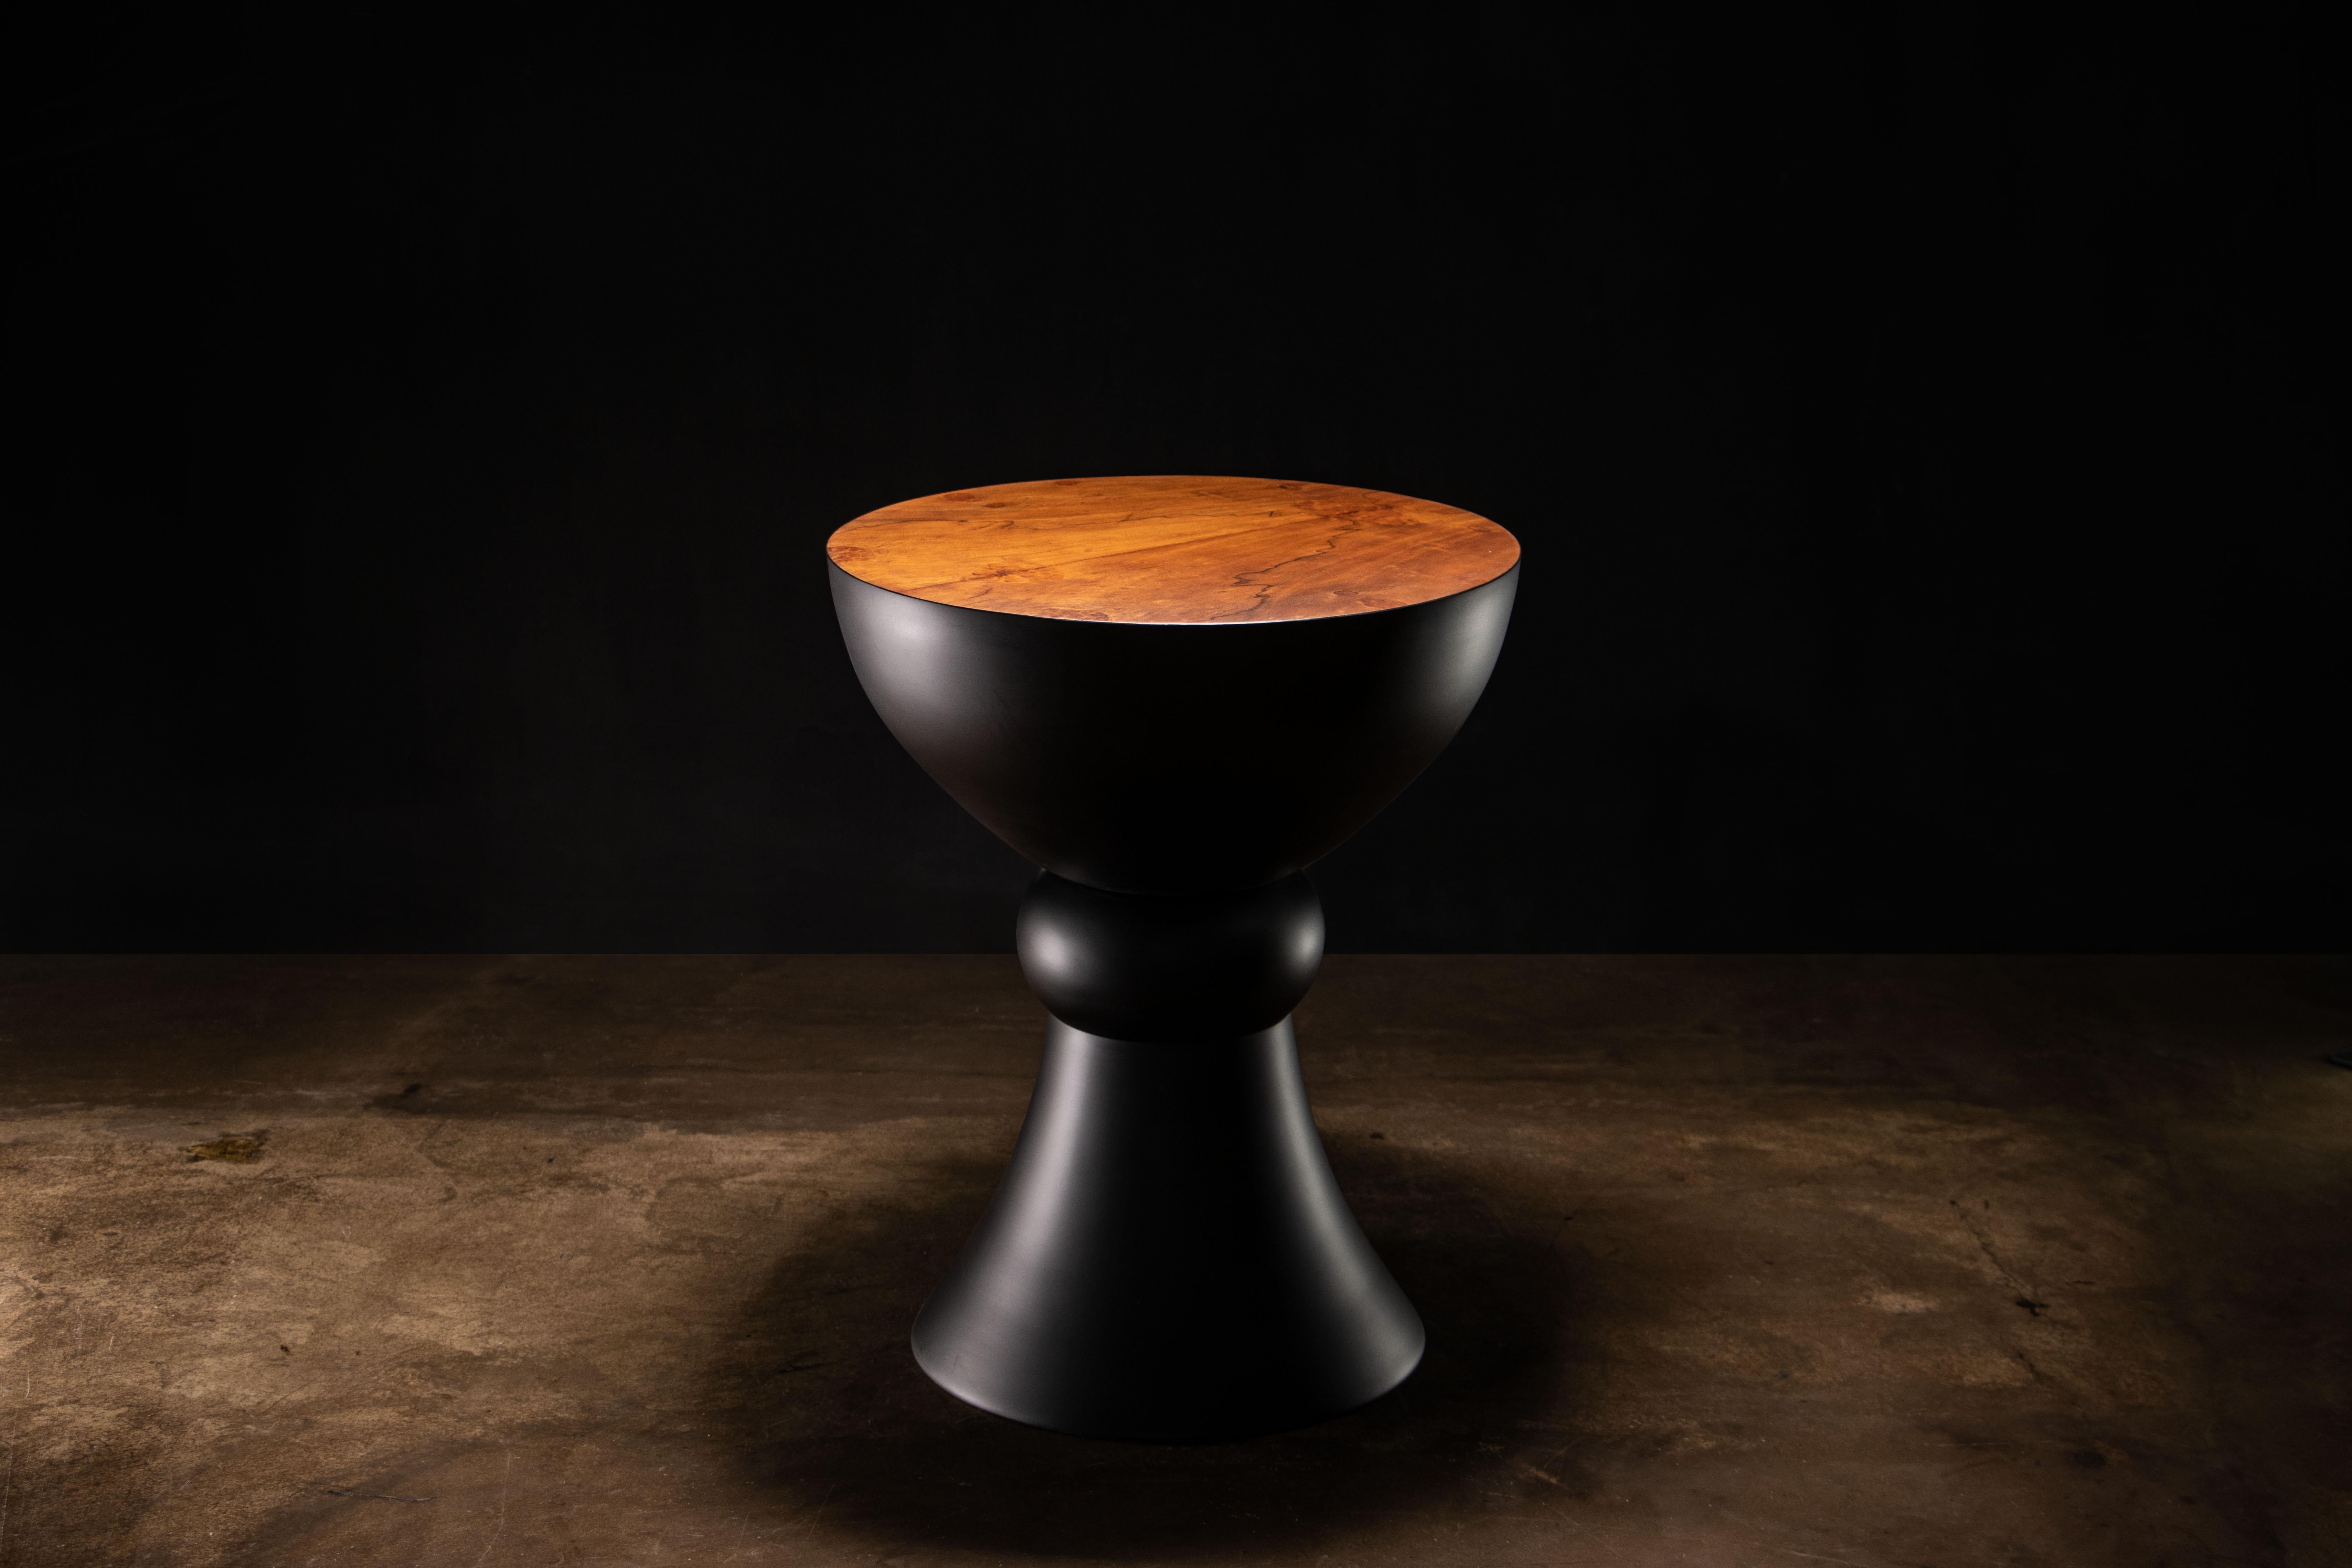 The Caliz occasional table, which can also function as seating, takes its name and its form from the Spanish word for chalice. Shown here in an ebonized finish with a Walnut Burl top.  

Dimensions are 18.5